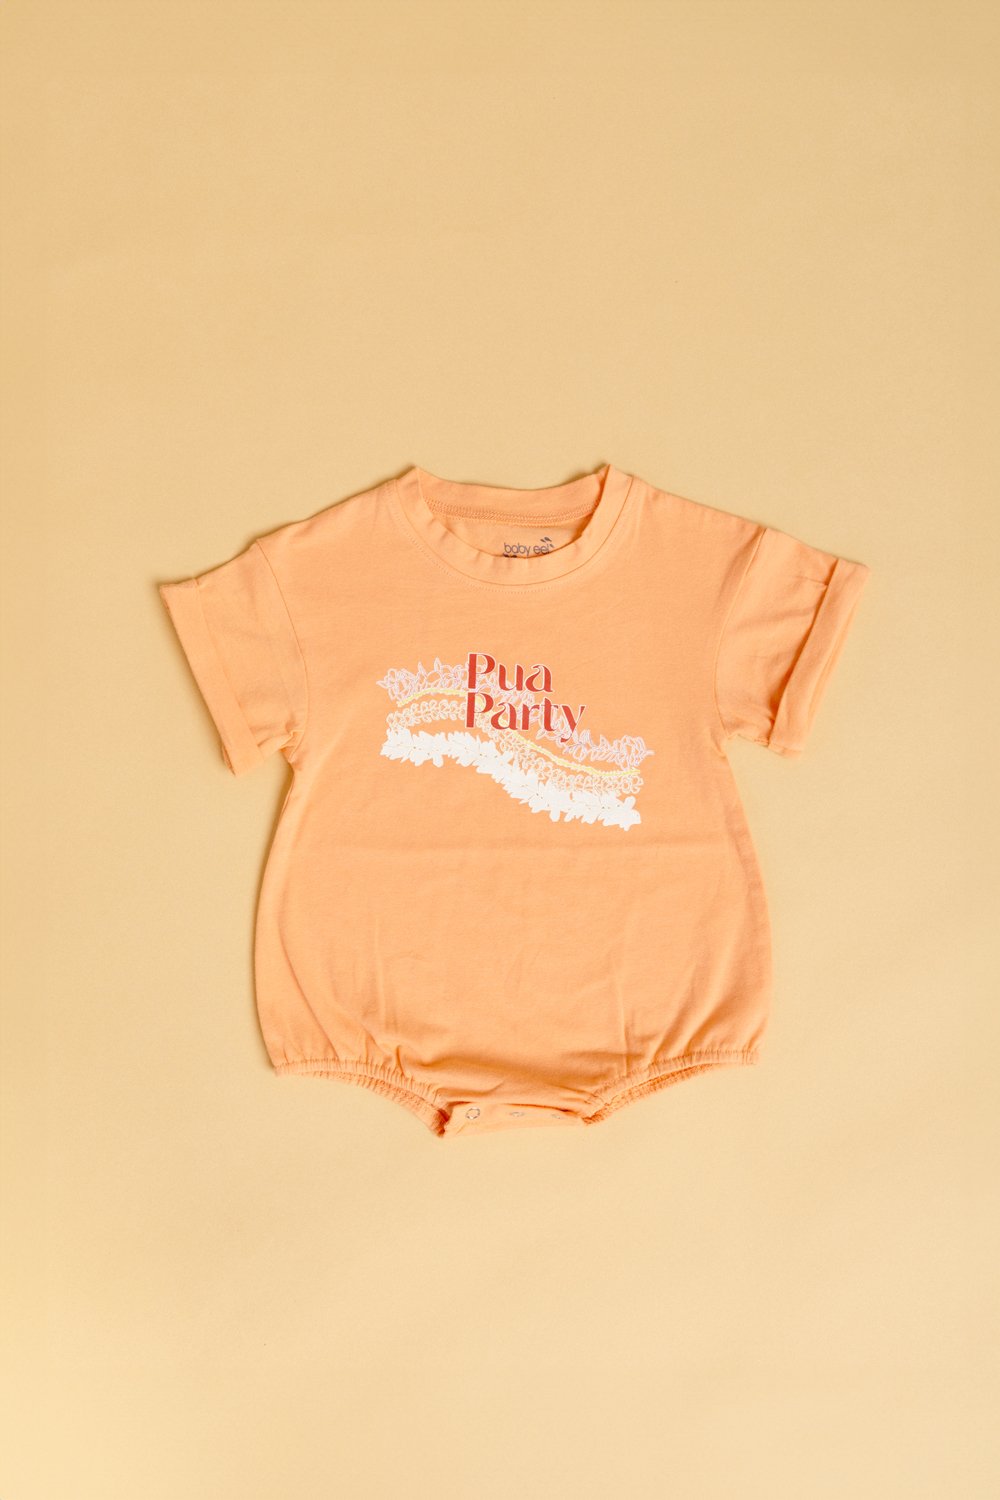 Onesie Tee - Coral Pua Party